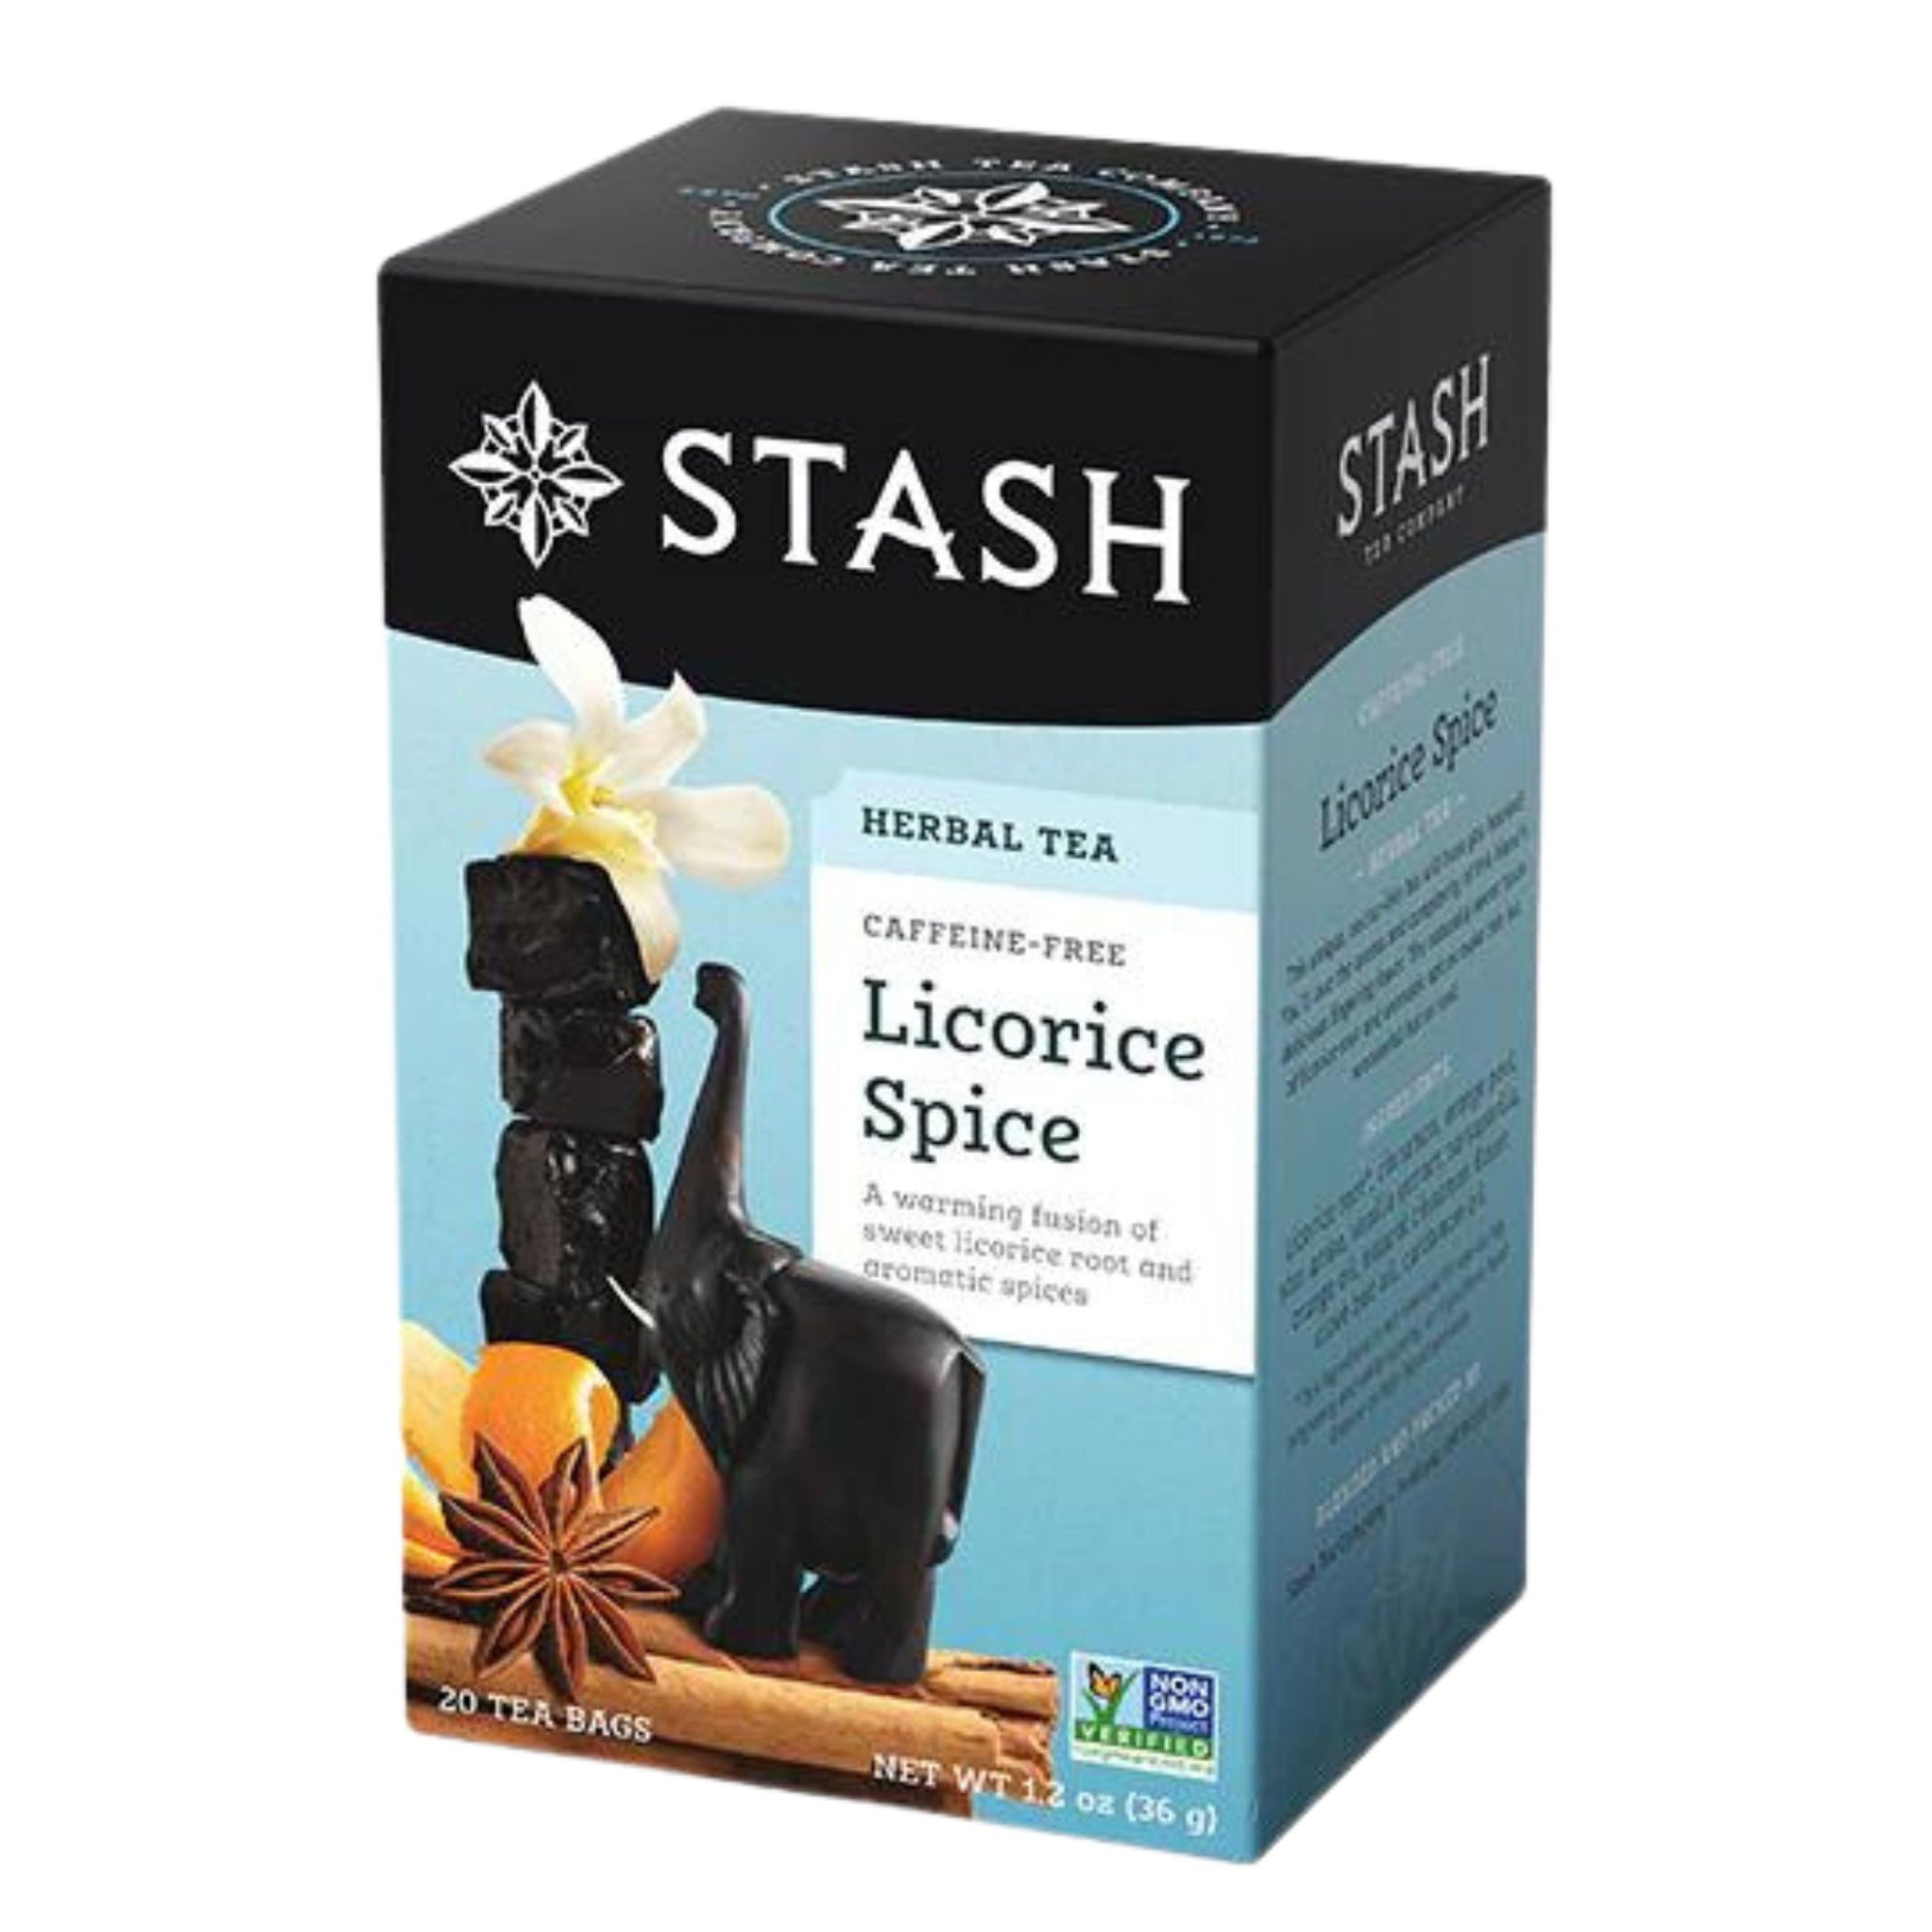 Stash Licorice Spice Herbal Tea - 20 Tea bags in a box - A warming fusion of sweet licorice root and aromatic spices. 